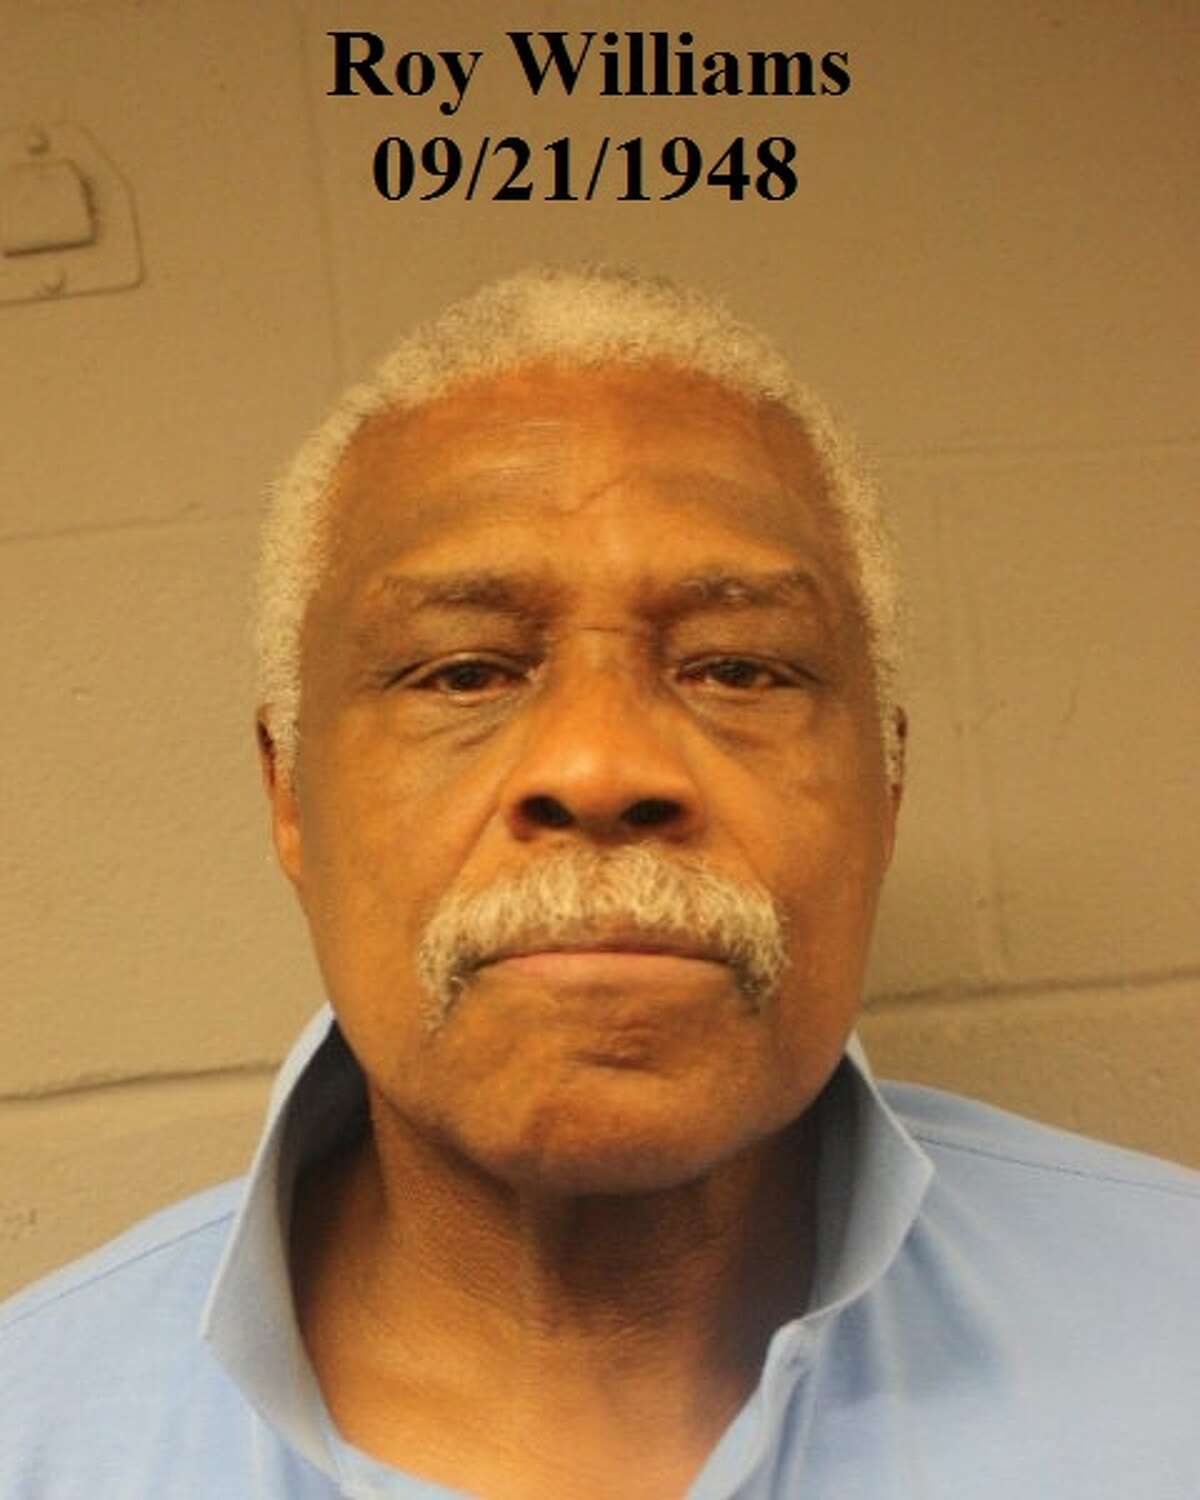 Roy L. Williams, 69, is charged with misdemeanor prostitution in Harris County.